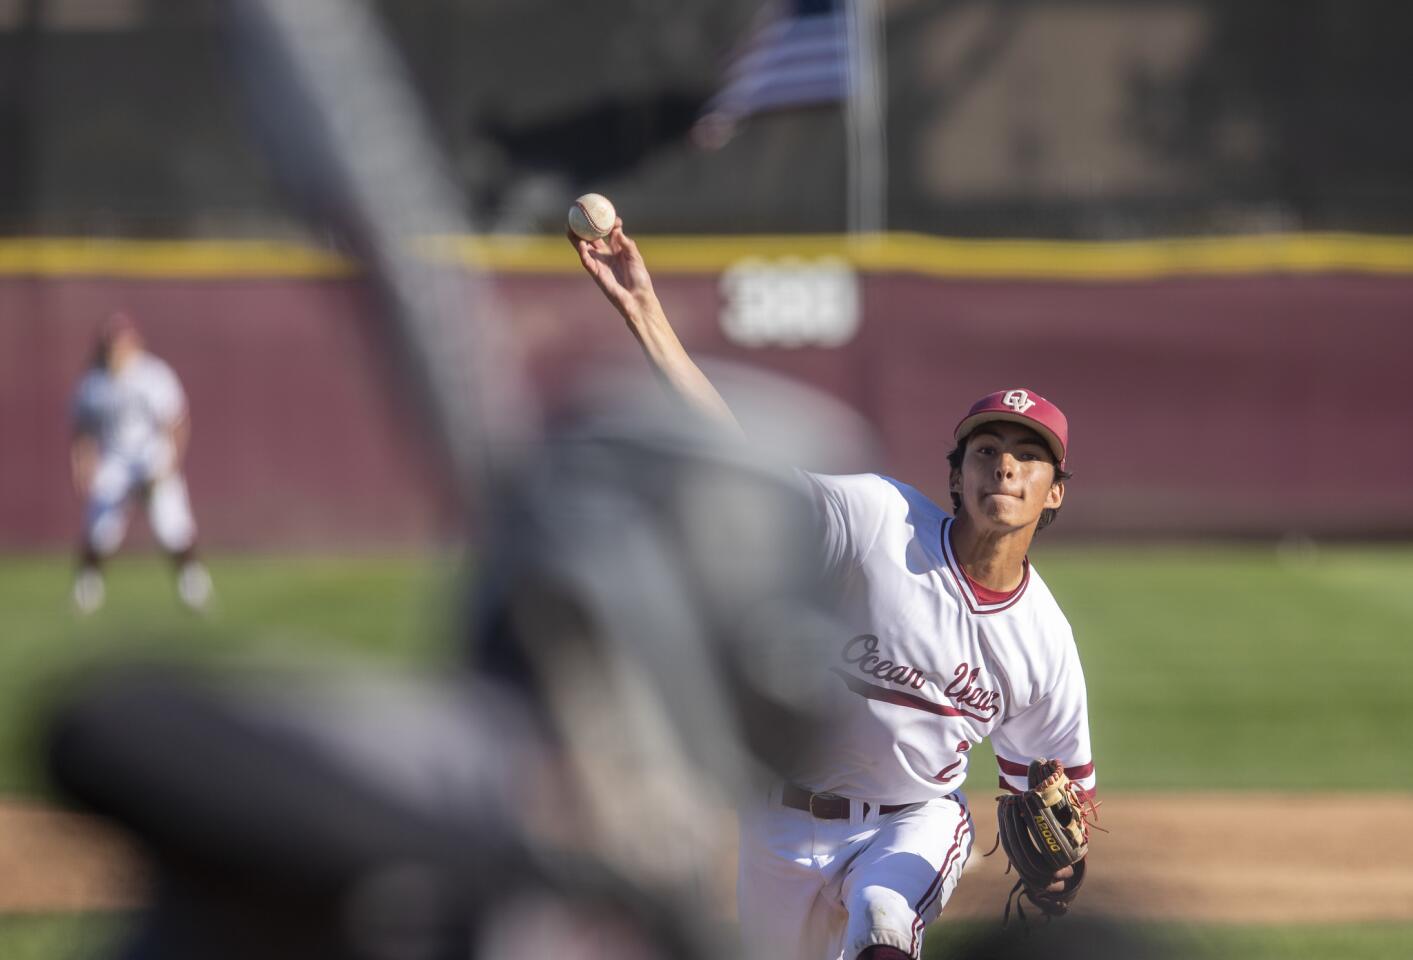 Ocean View's Gavin Kennedy pitches during a Golden West League game against Segerstrom on Friday, March 15.